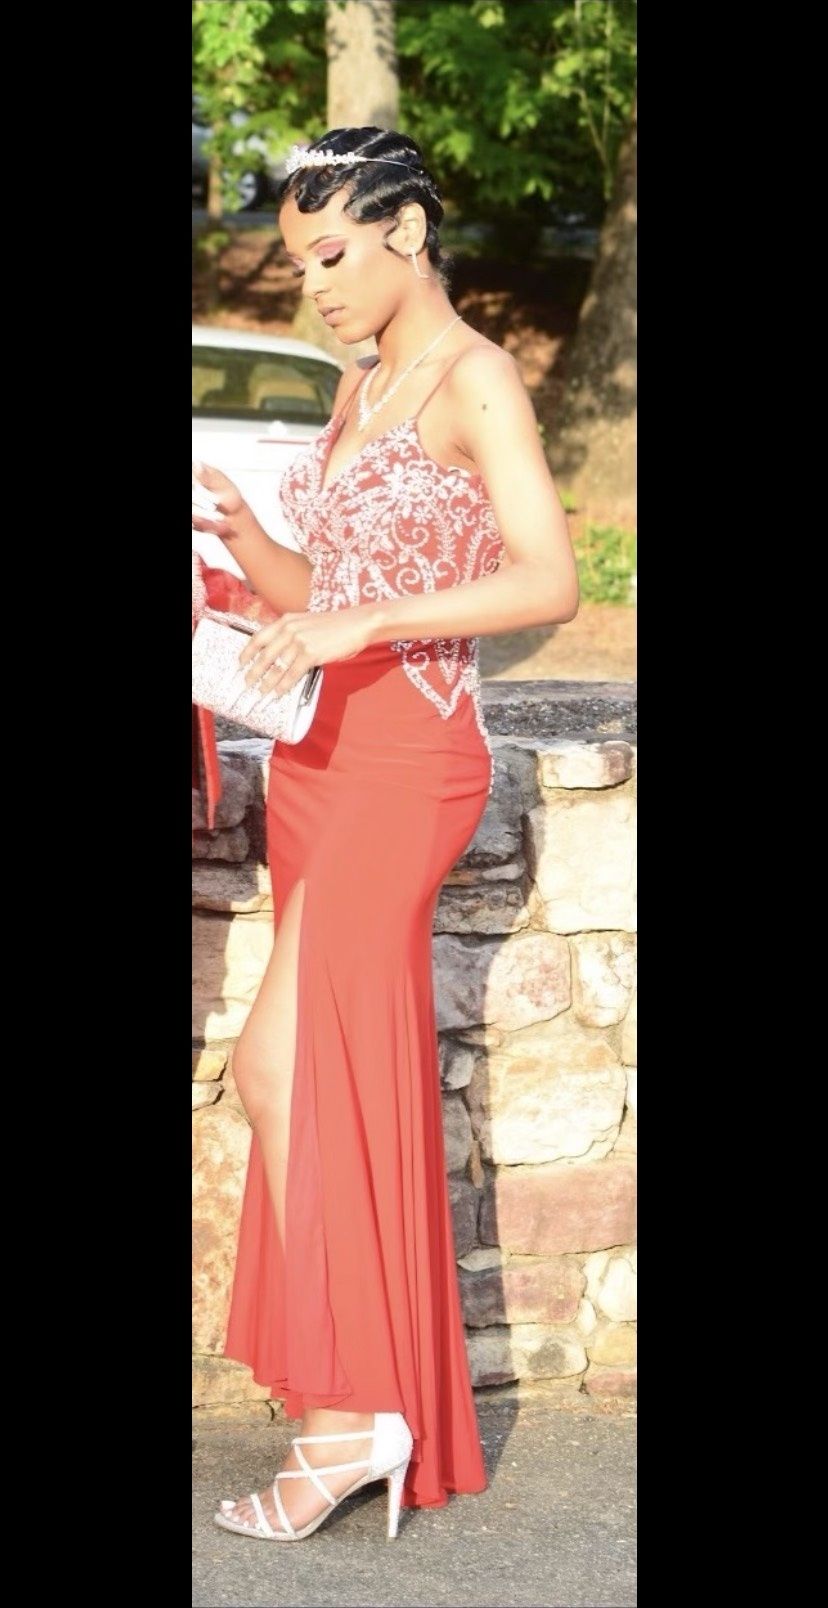 Size S Prom Red Side Slit Dress on Queenly